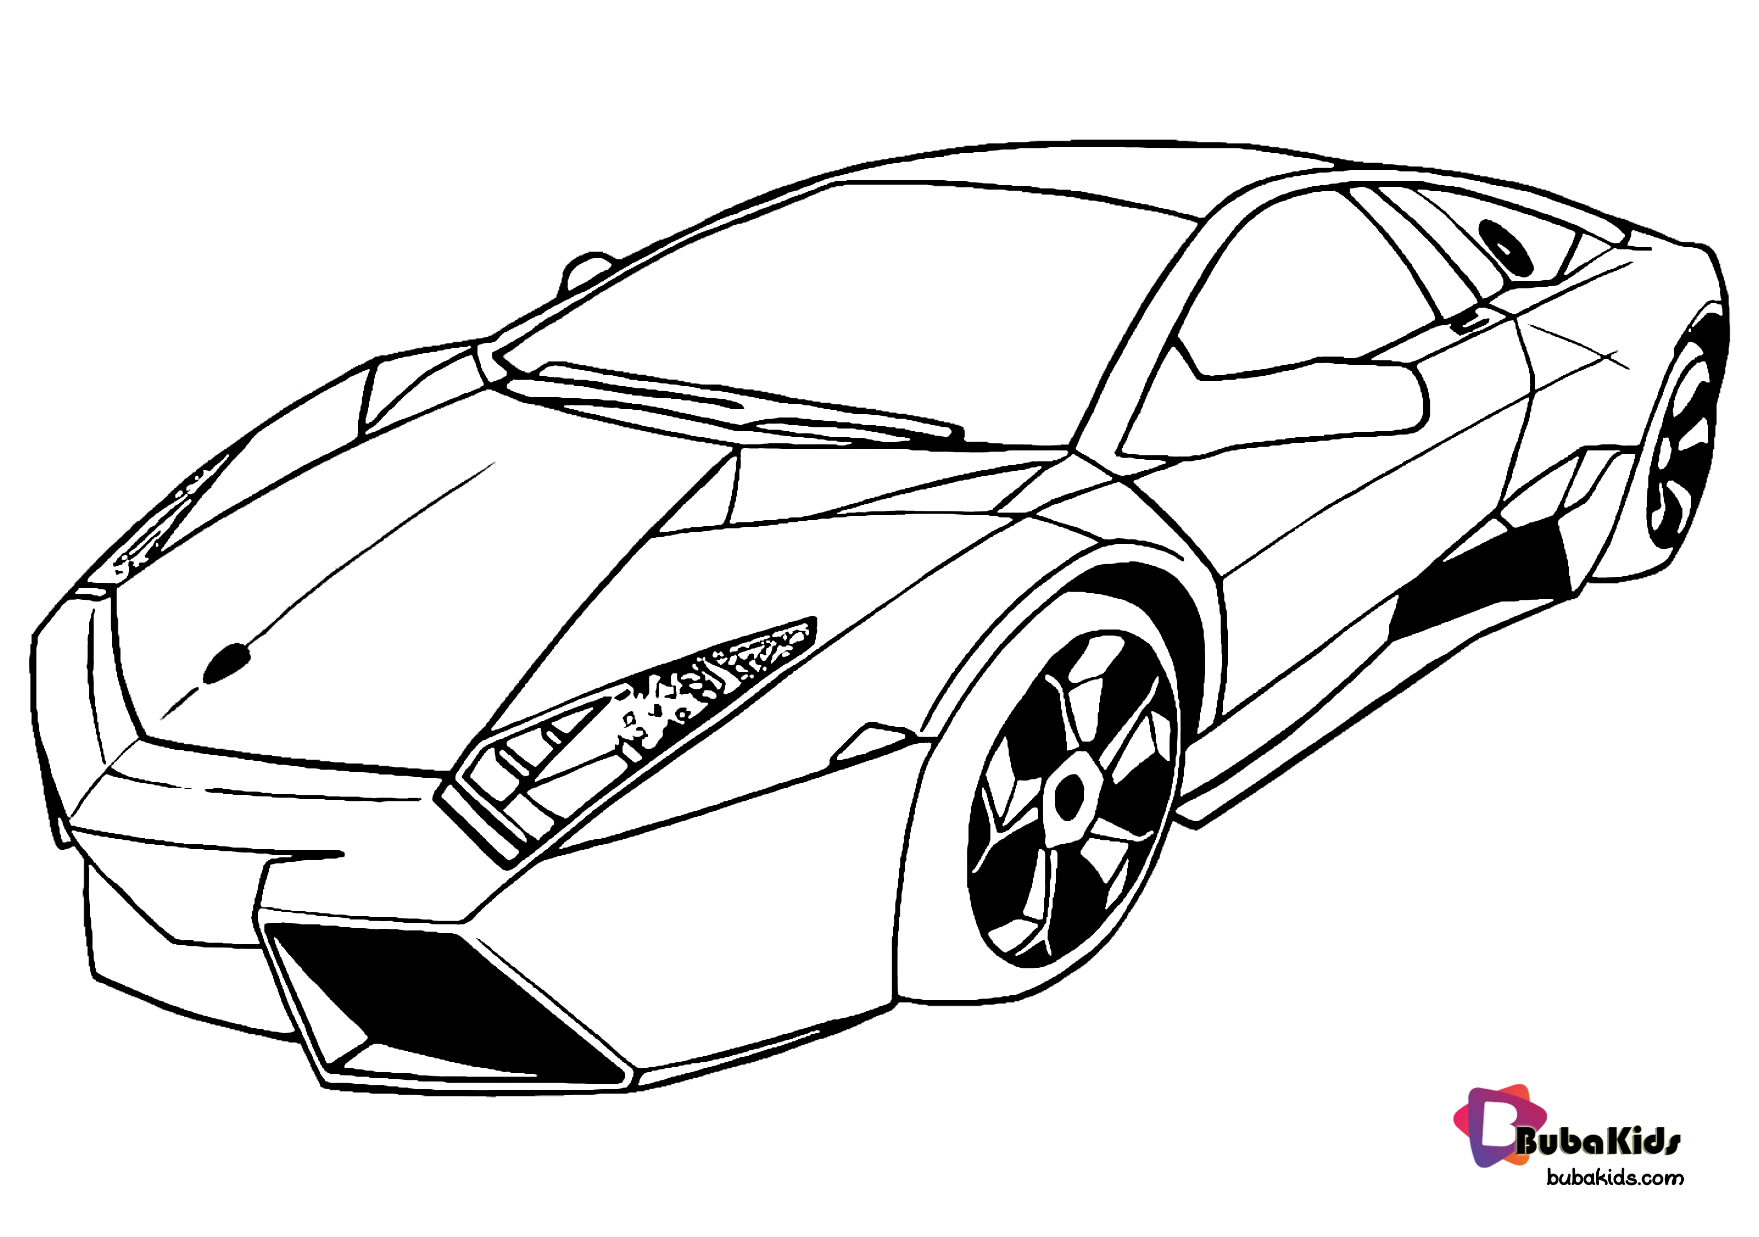 free-download-and-printable-super-car-coloring-page-in-2020-cars